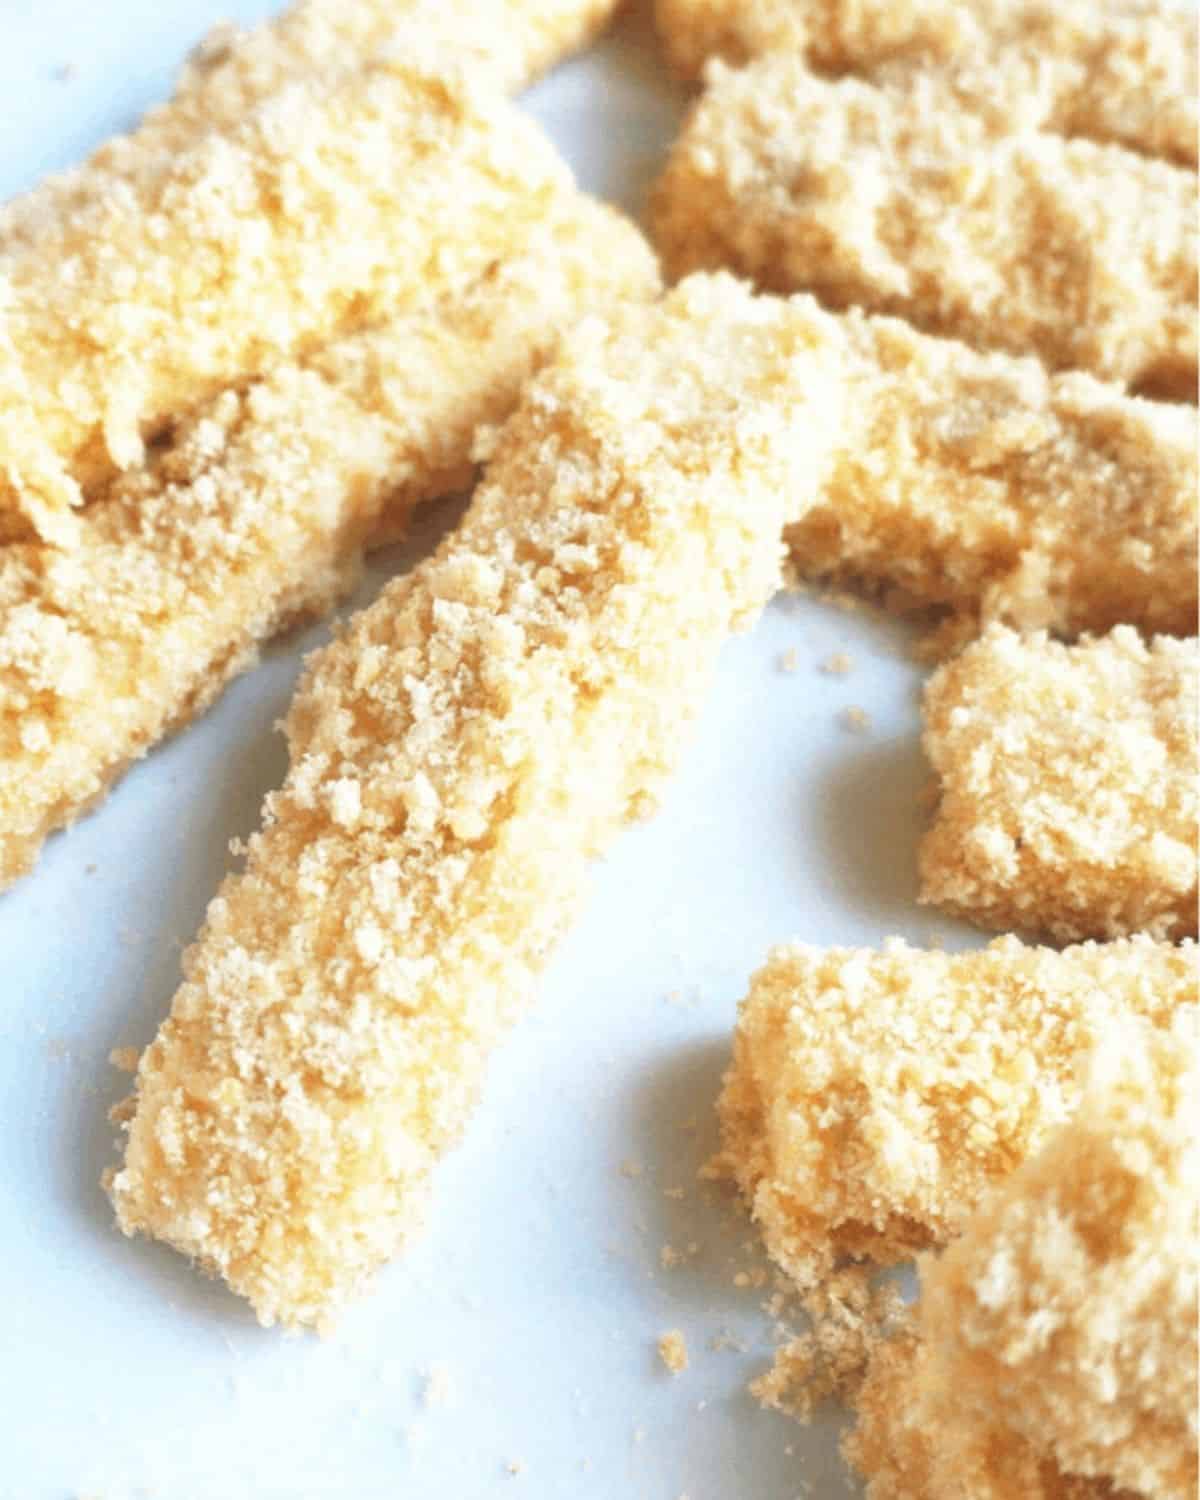 The strips of cheese coated in the pork rinds and ready to fry.